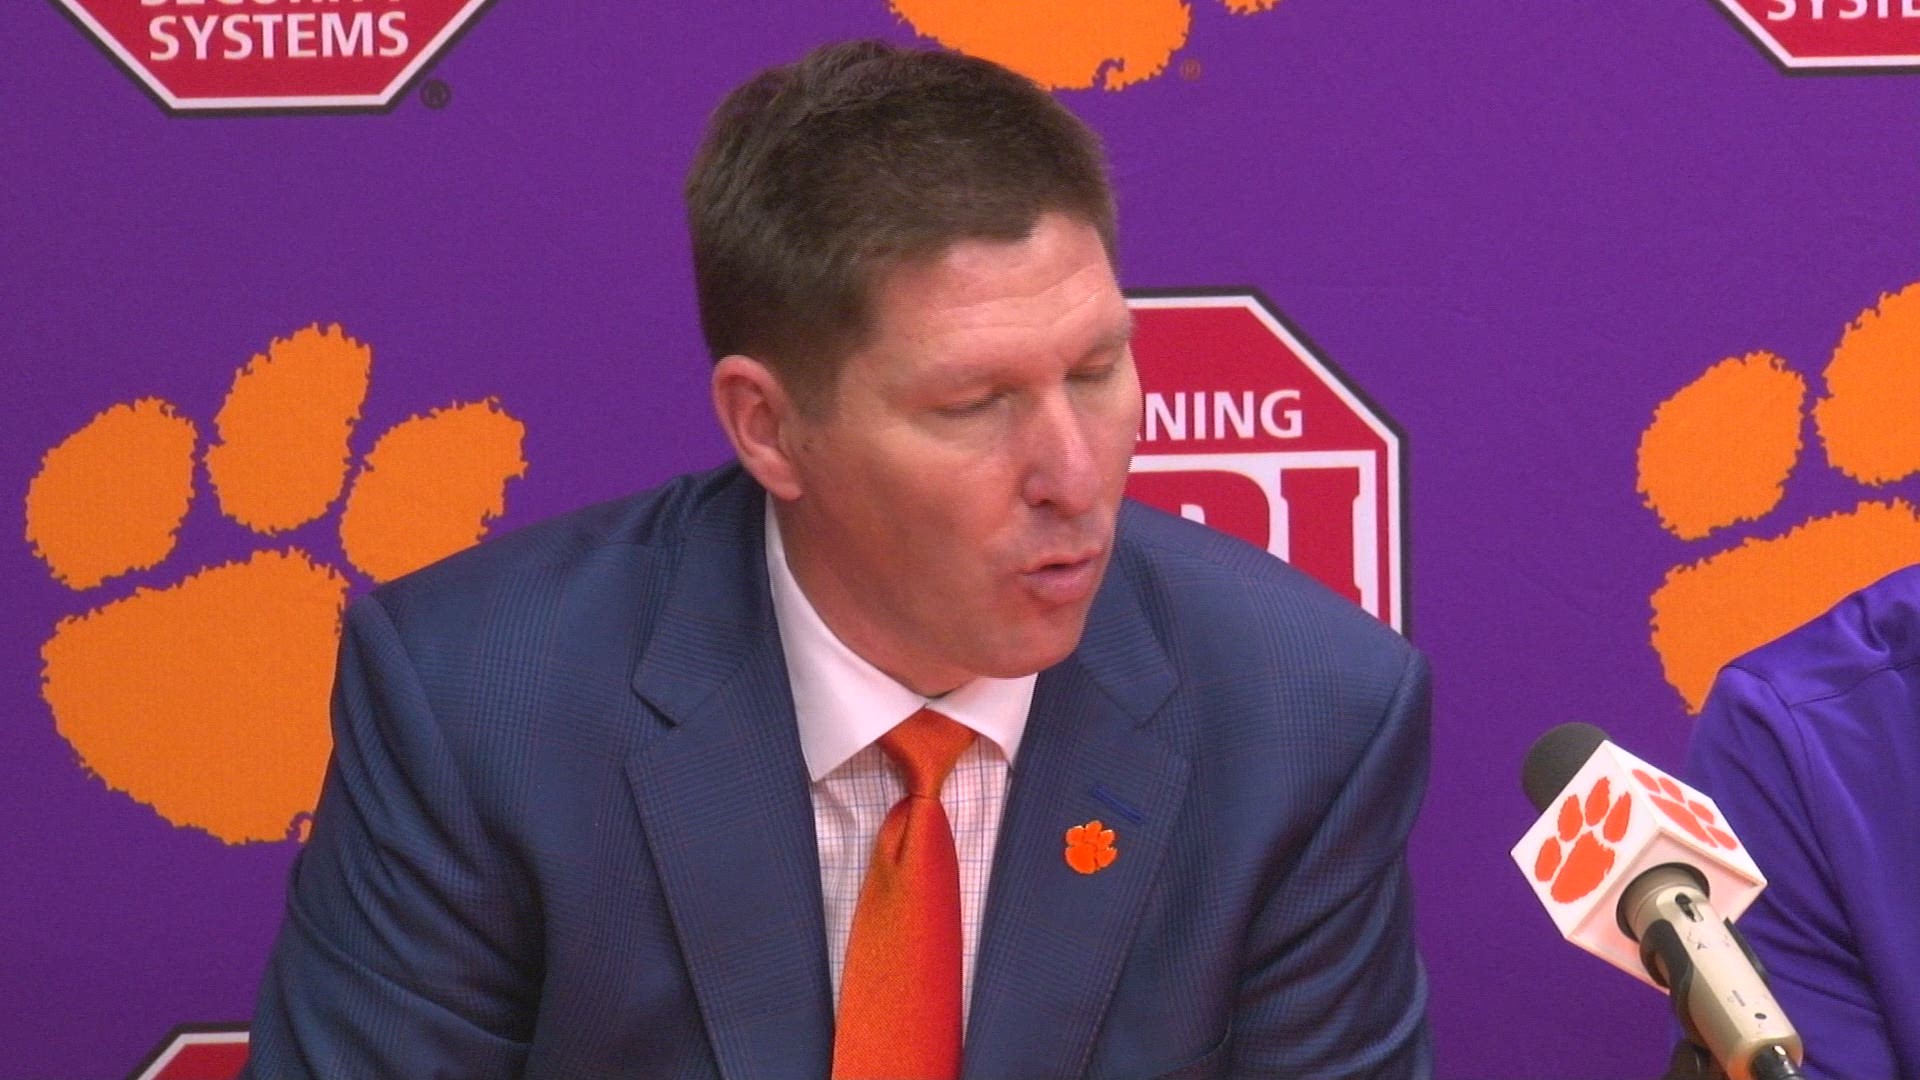 Clemson defeats South Carolina 63-48 in Littlejohn Coliseum for their sixth straight win. They have a 10-1 record and head coach Brad Brownell talks about the win over the Gamecocks and his team learning how to deal with success and learning from wins ear